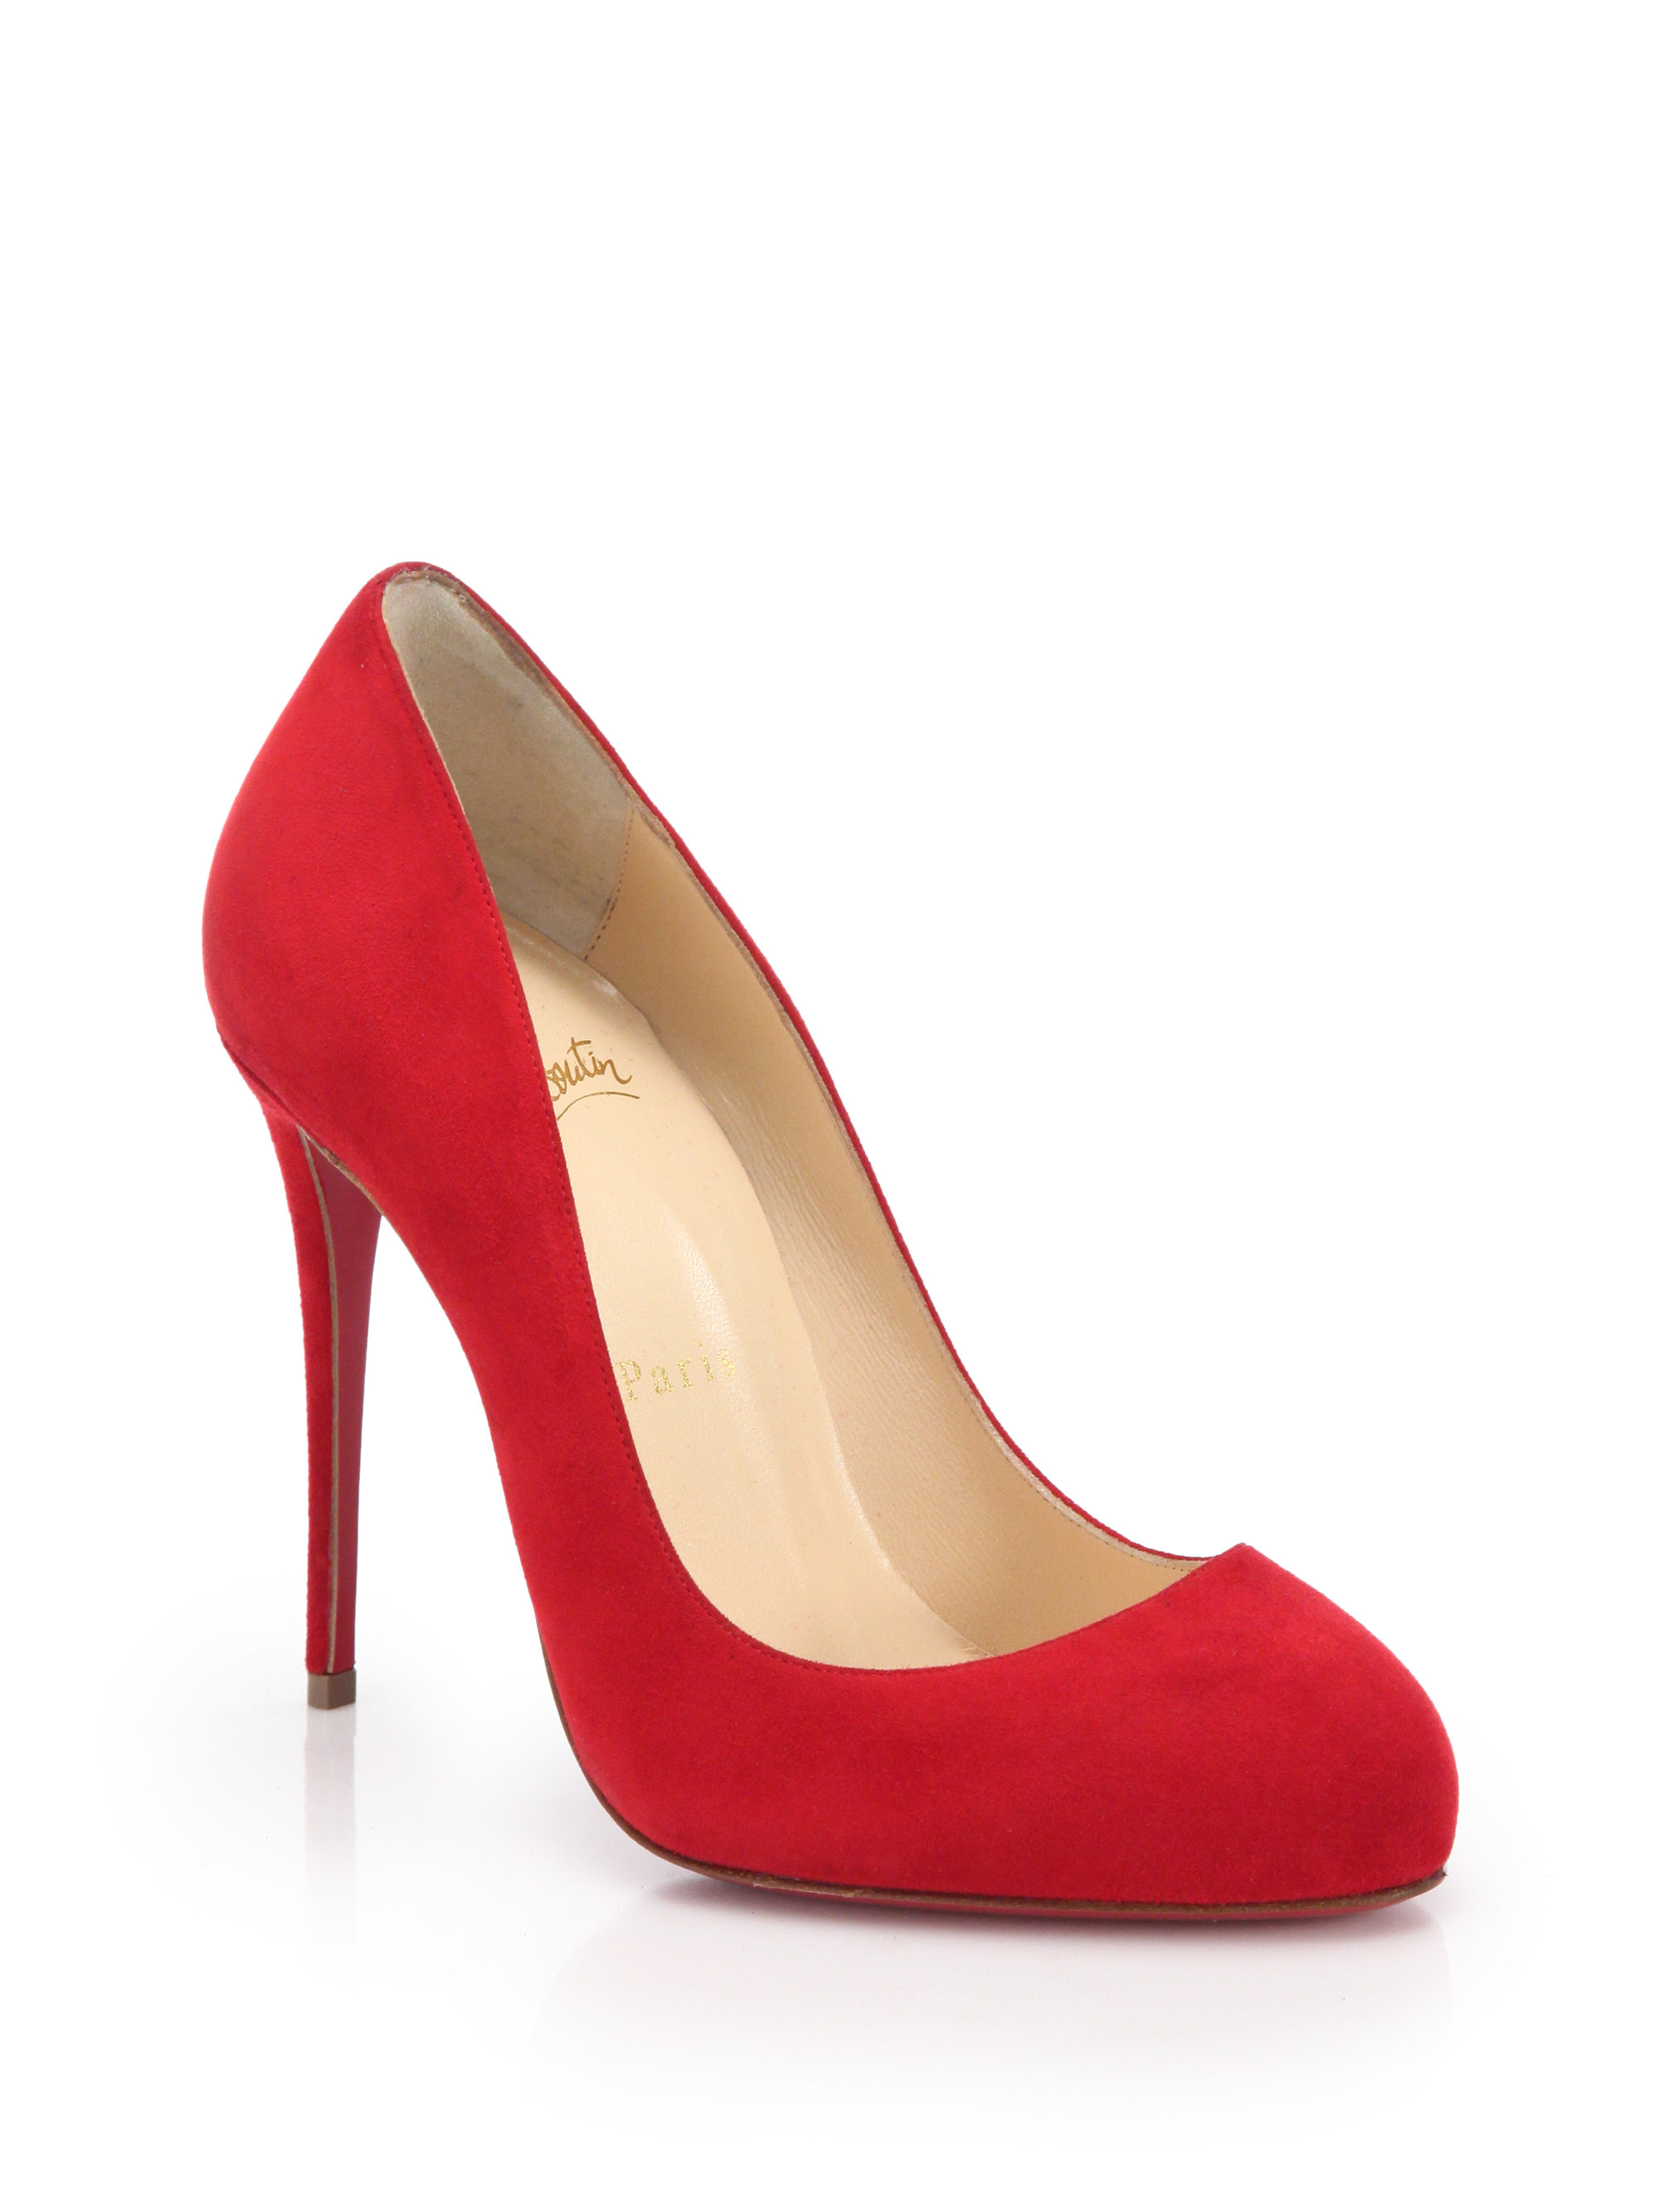 Lyst - Christian louboutin Dorissima Suede Pumps in Red